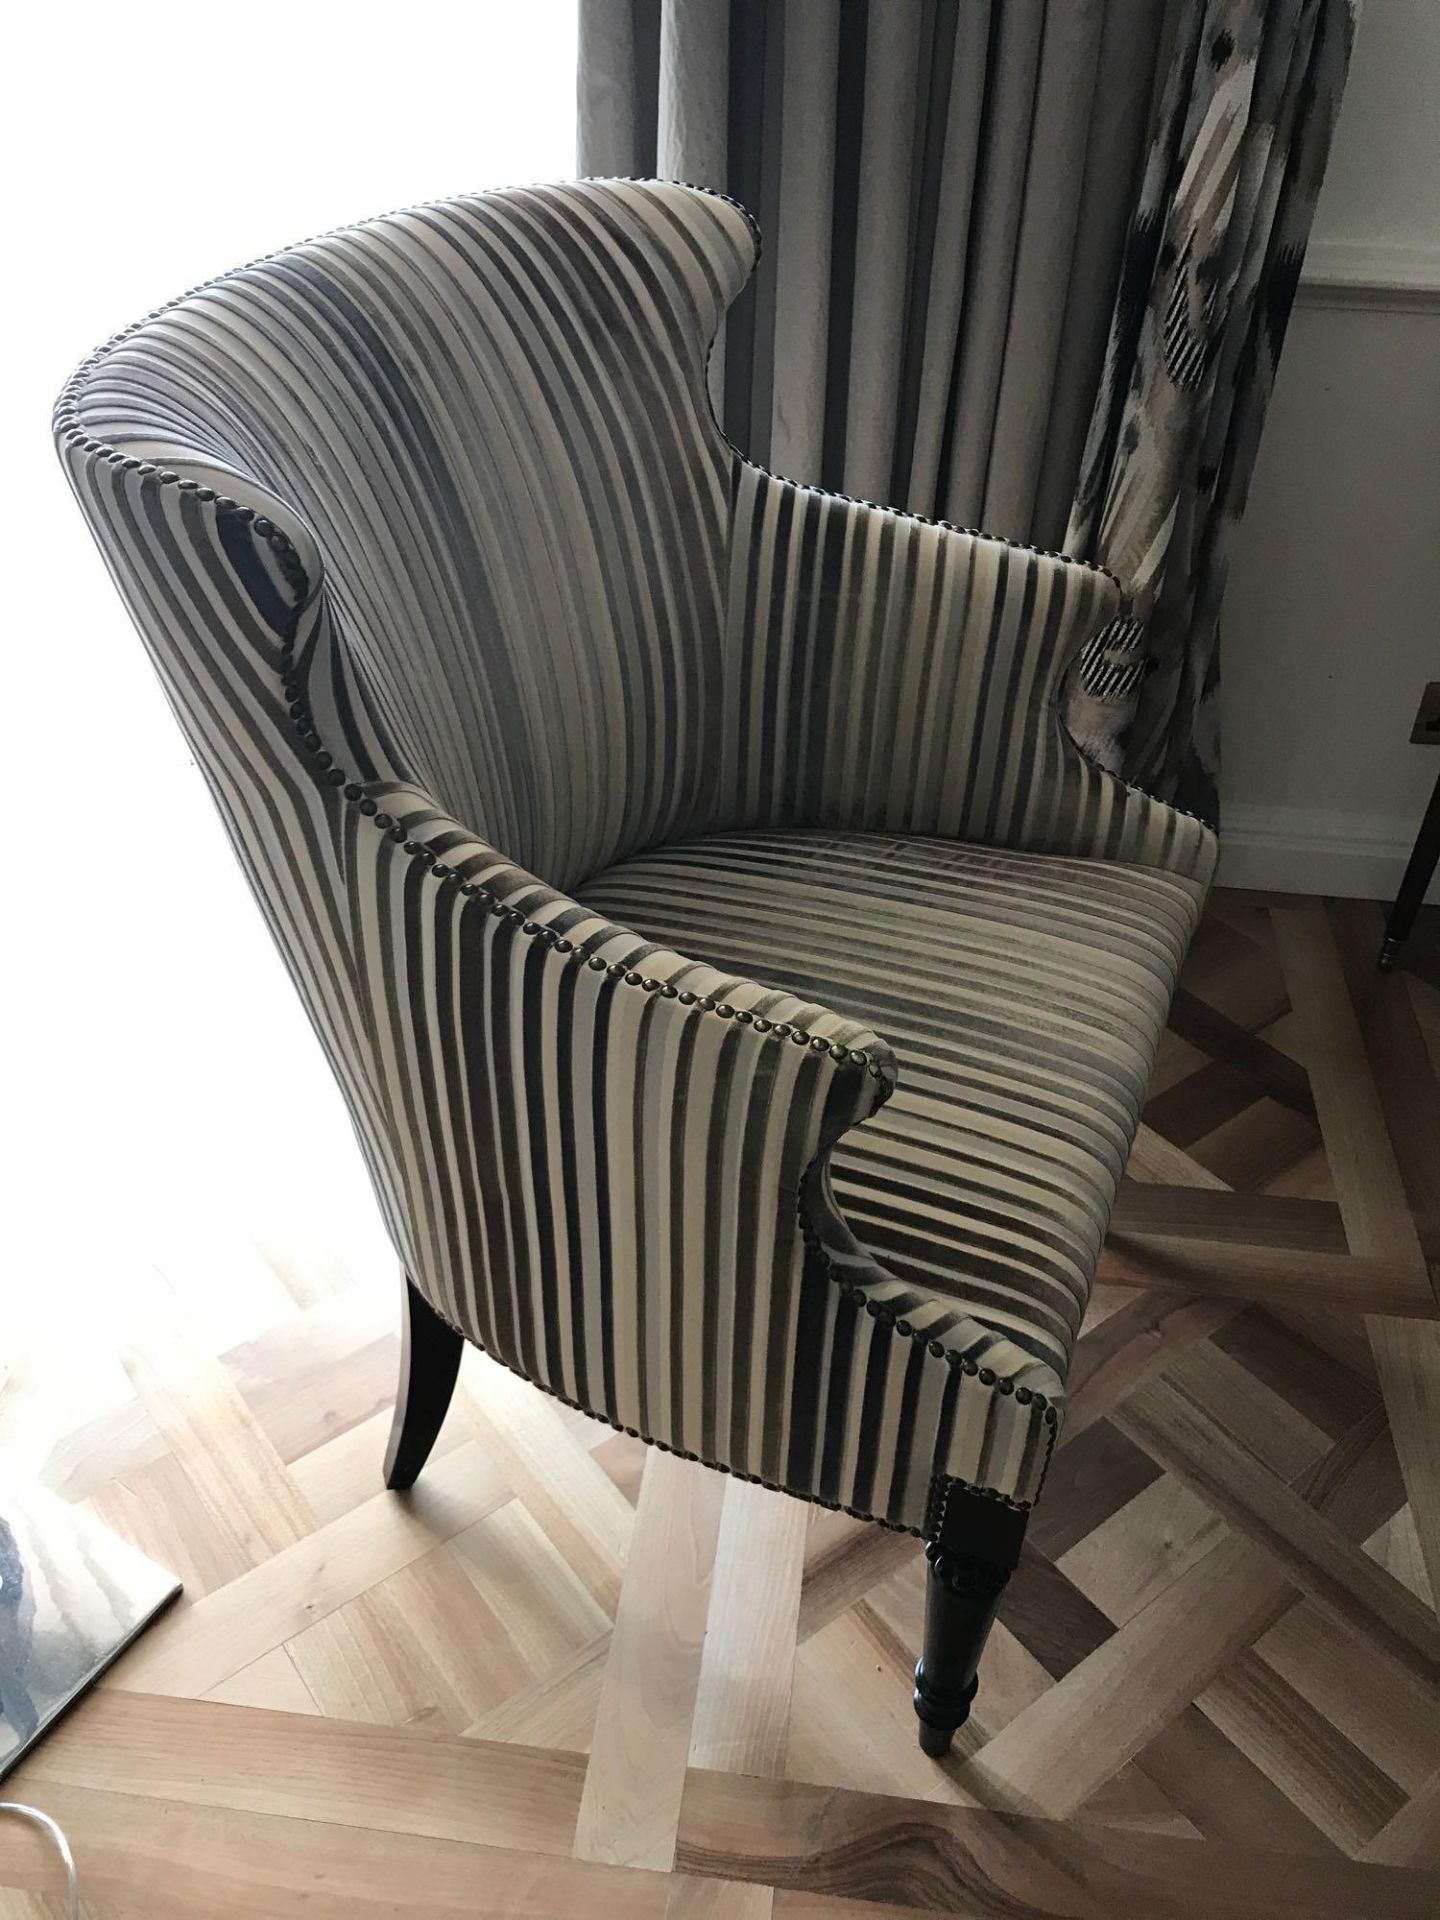 Accent Chair In Upholstered Striped Fabric 65 x 49 x 84cm Room 604 - Bild 2 aus 2